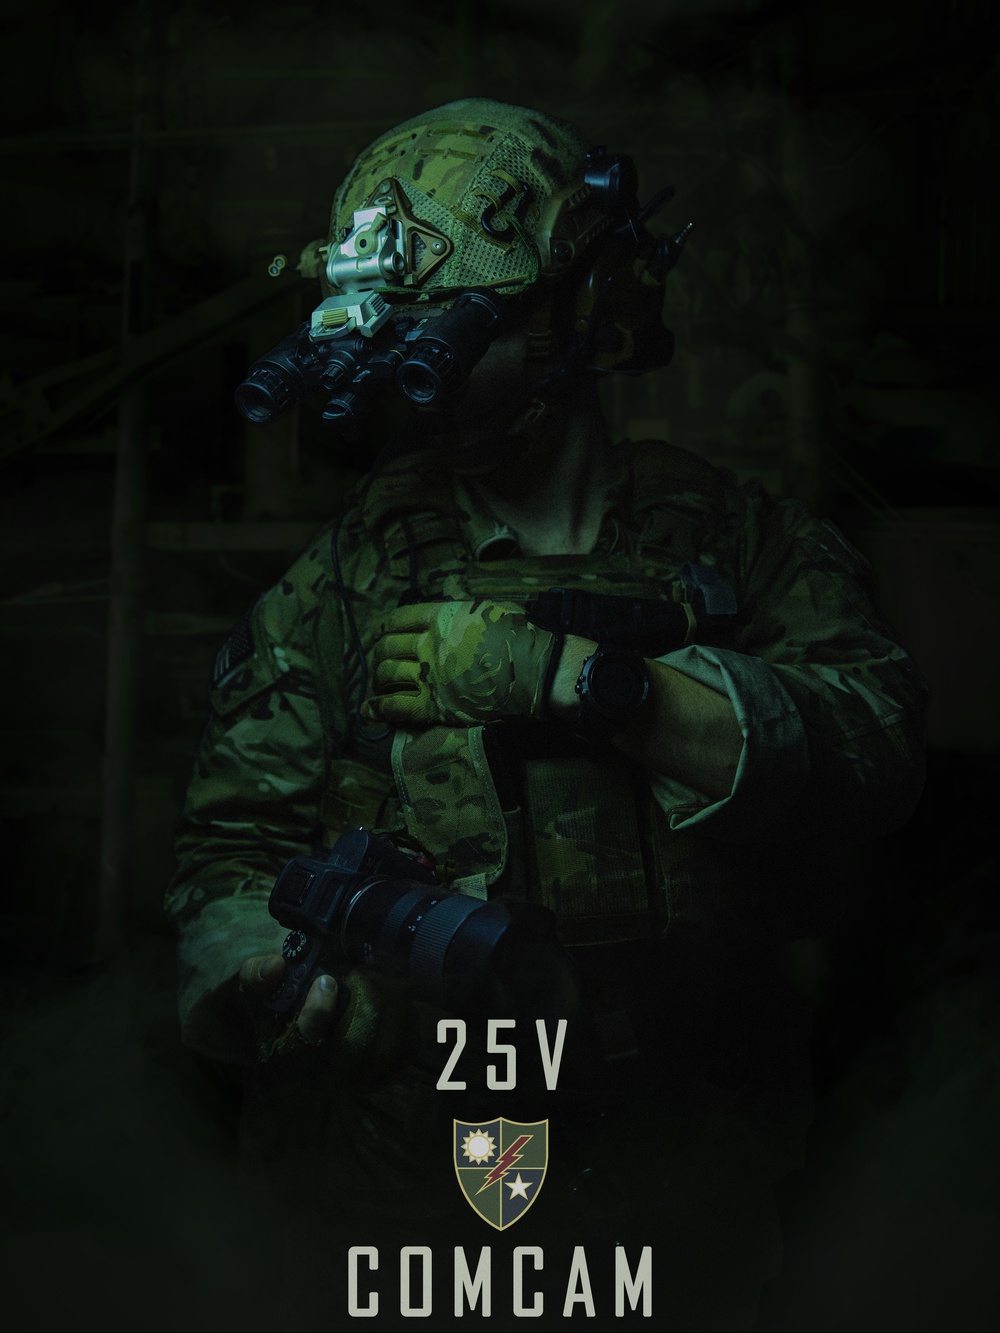 Army Ranger Wallpapers  Duty Modern Warfare 2 Rangers PNG Image   Transparent PNG Free Download on SeekPNG